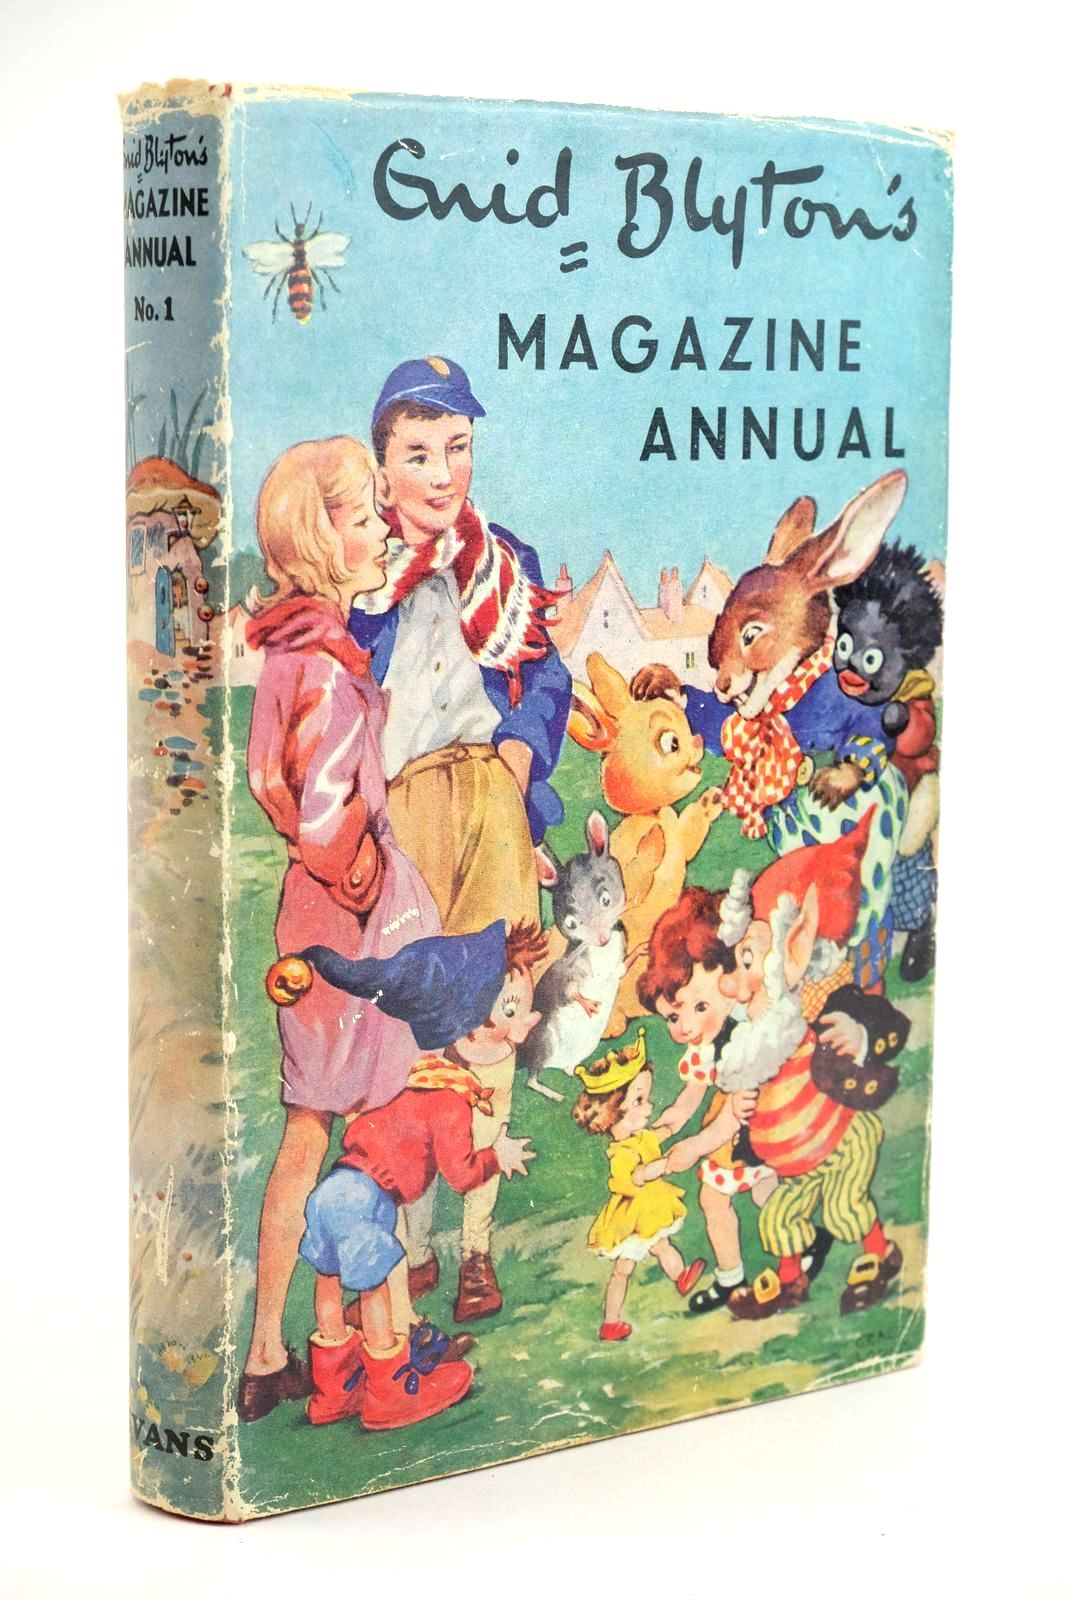 Photo of ENID BLYTON'S MAGAZINE ANNUAL No. 1 written by Blyton, Enid published by Evans Brothers Limited (STOCK CODE: 1323590)  for sale by Stella & Rose's Books